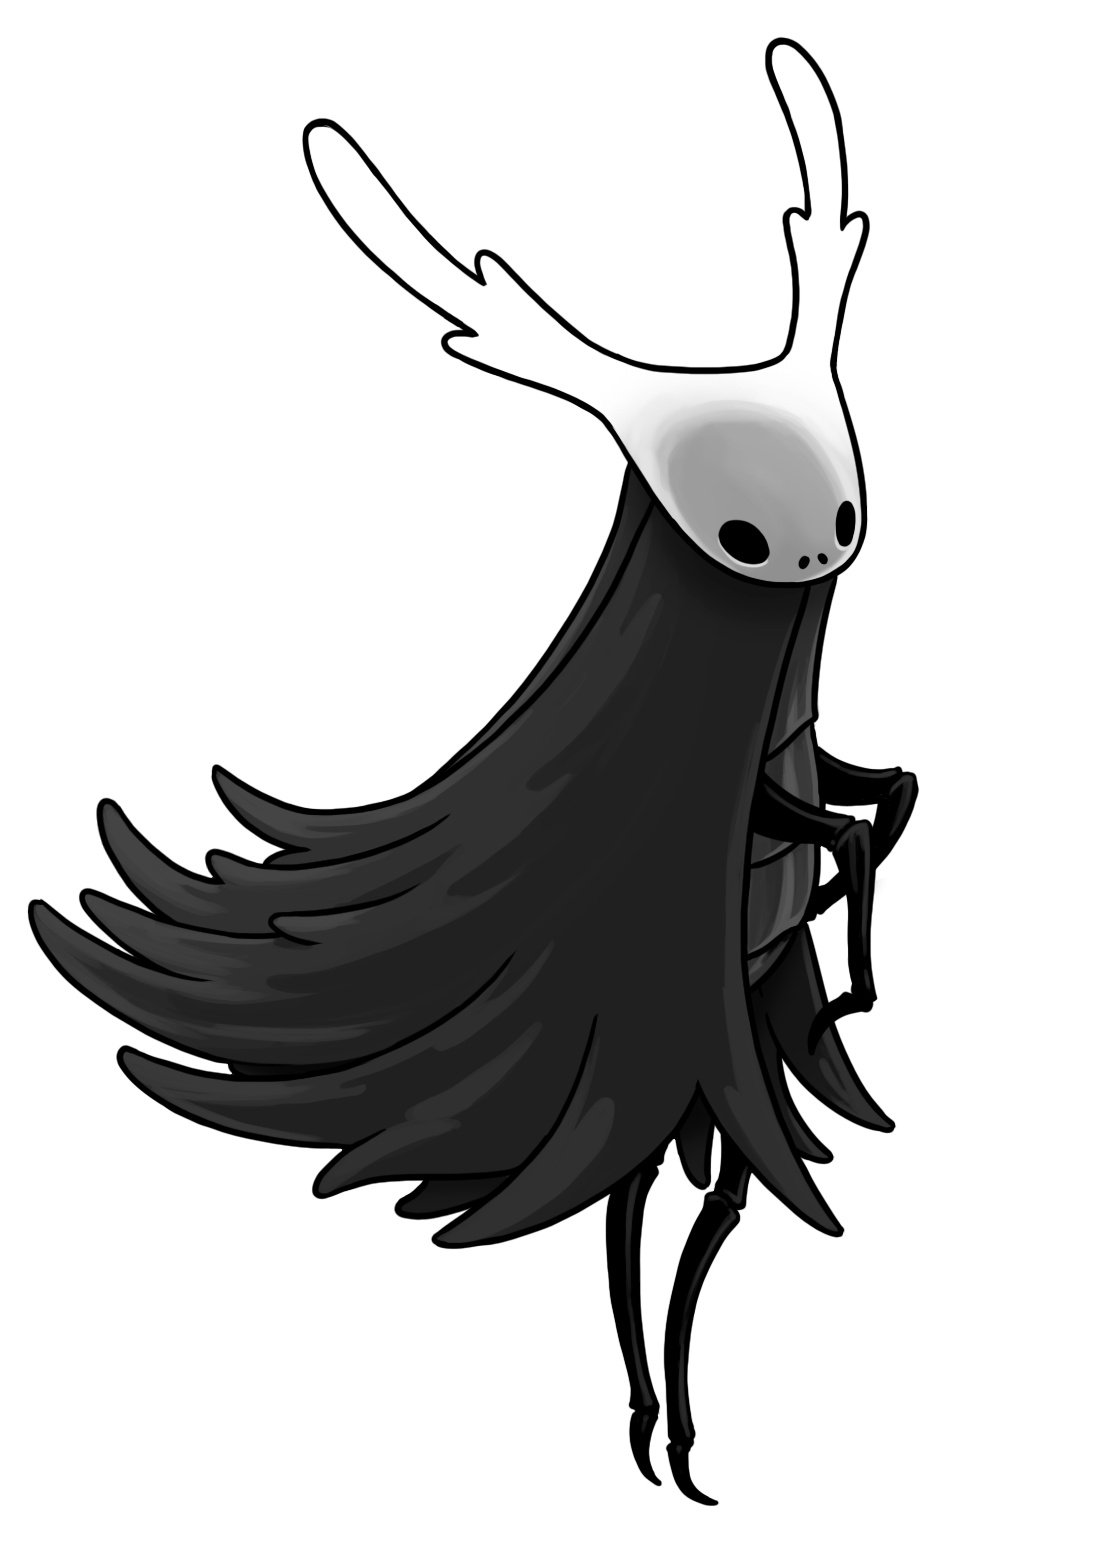 Team Cherry Discord Riddle Reveals A New Hollow Knight Silksong